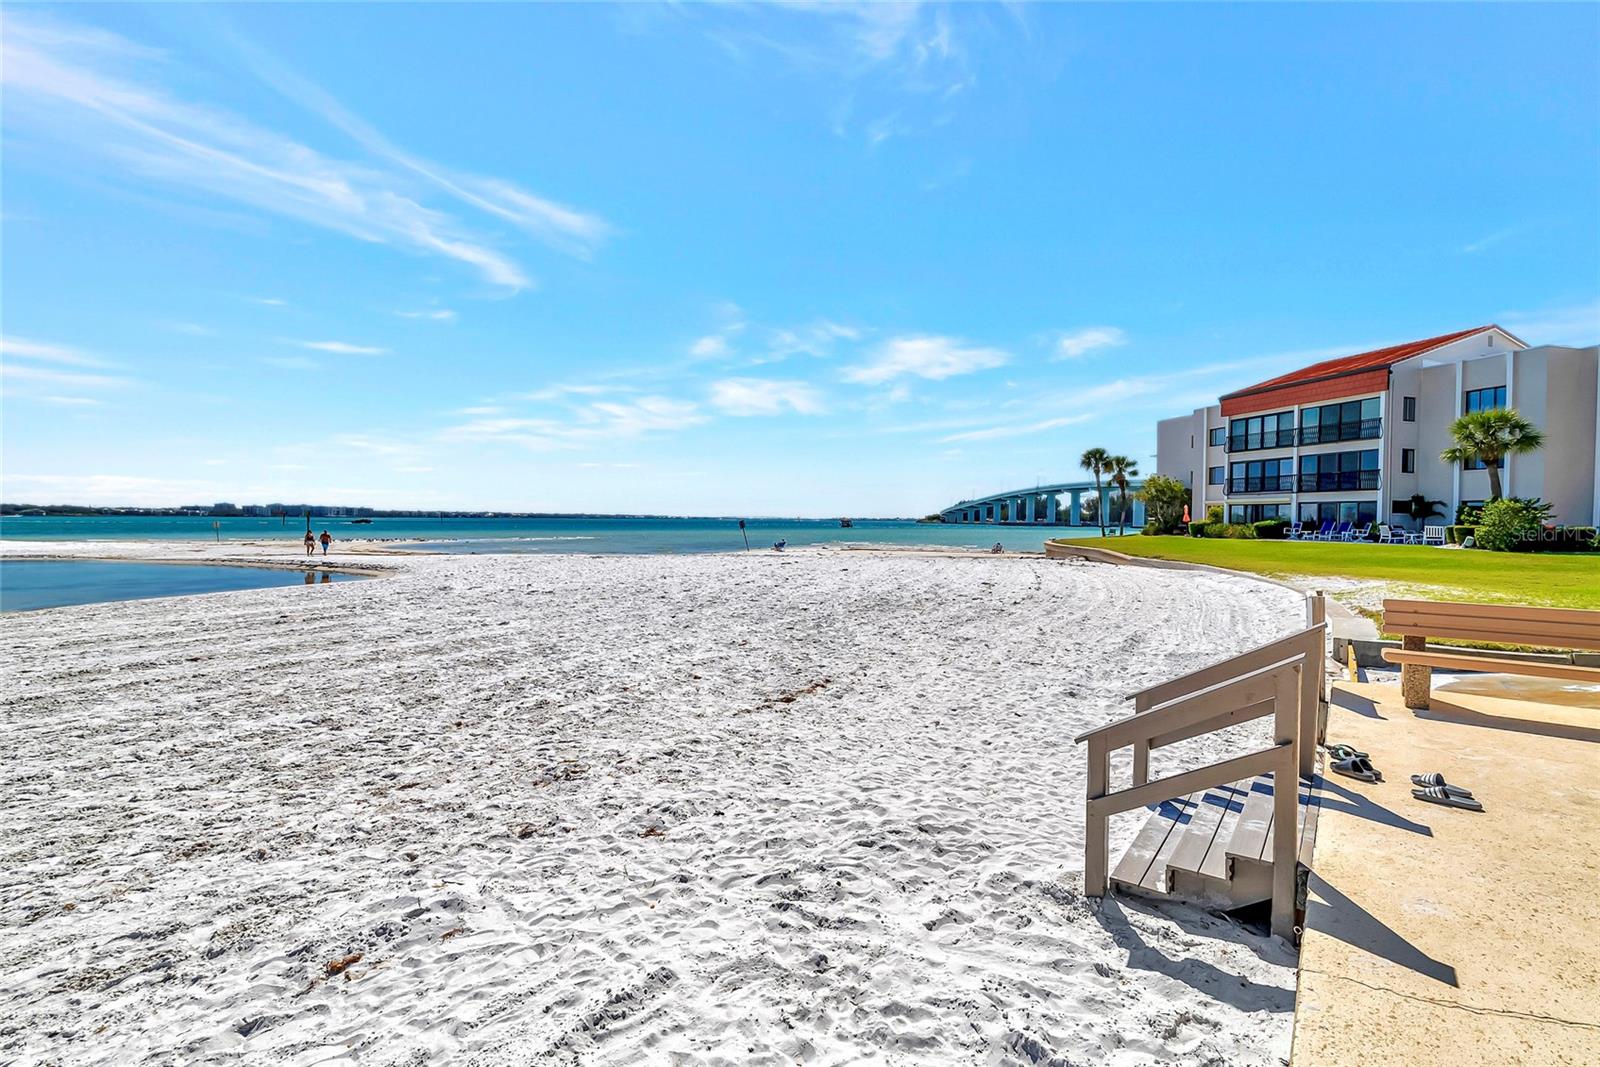 With exclusive access to this tranquil beachfront retreat, residents can bask in the sun, take a refreshing dip in the ocean, or simply unwind with the soothing sound of the waves.